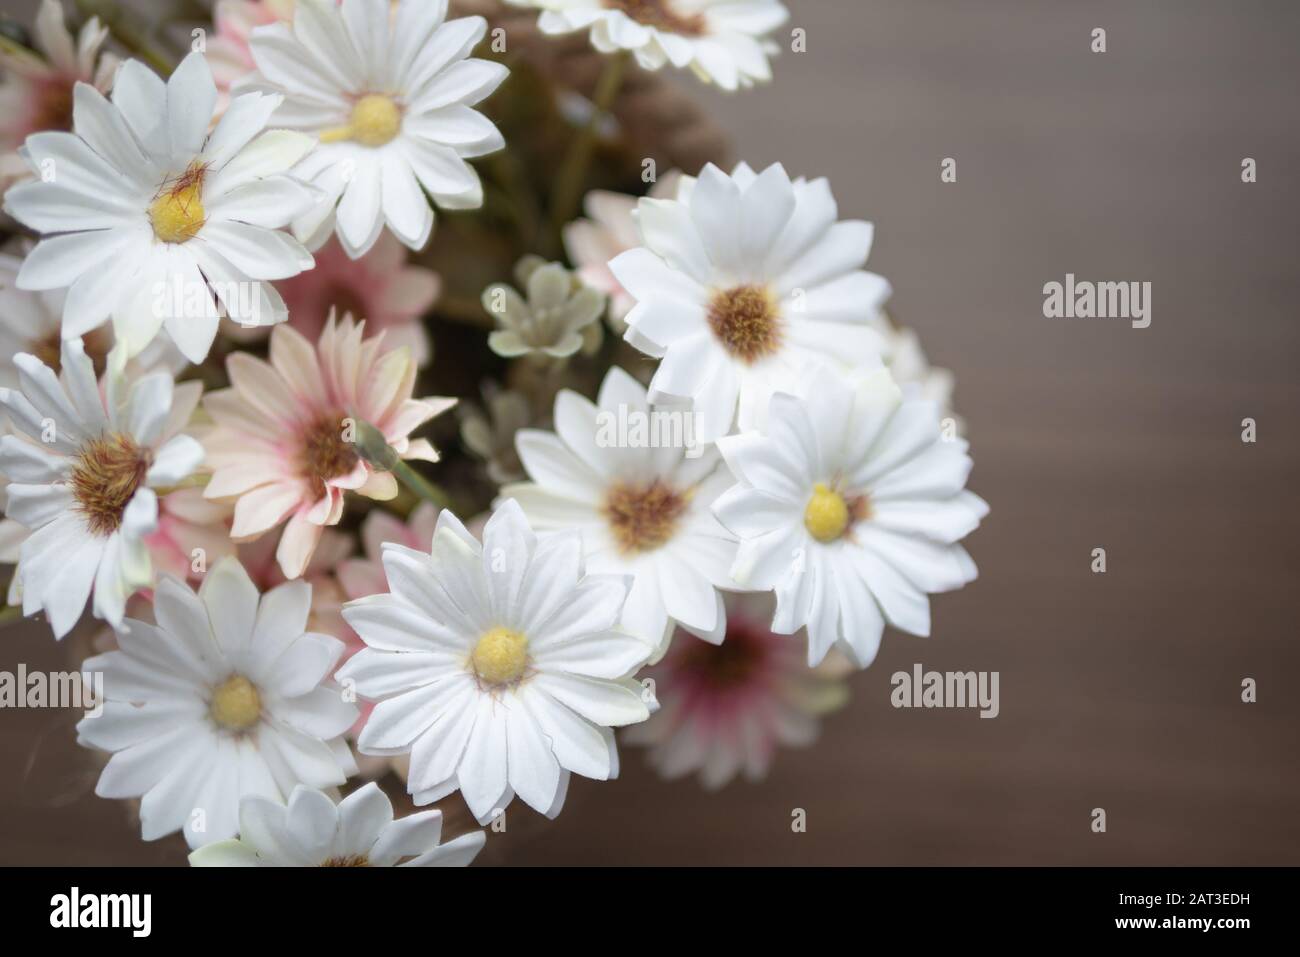 Close up white and pink flowers on the wooden table with yellow pollen. Top view blooming of fake flower. Stock Photo